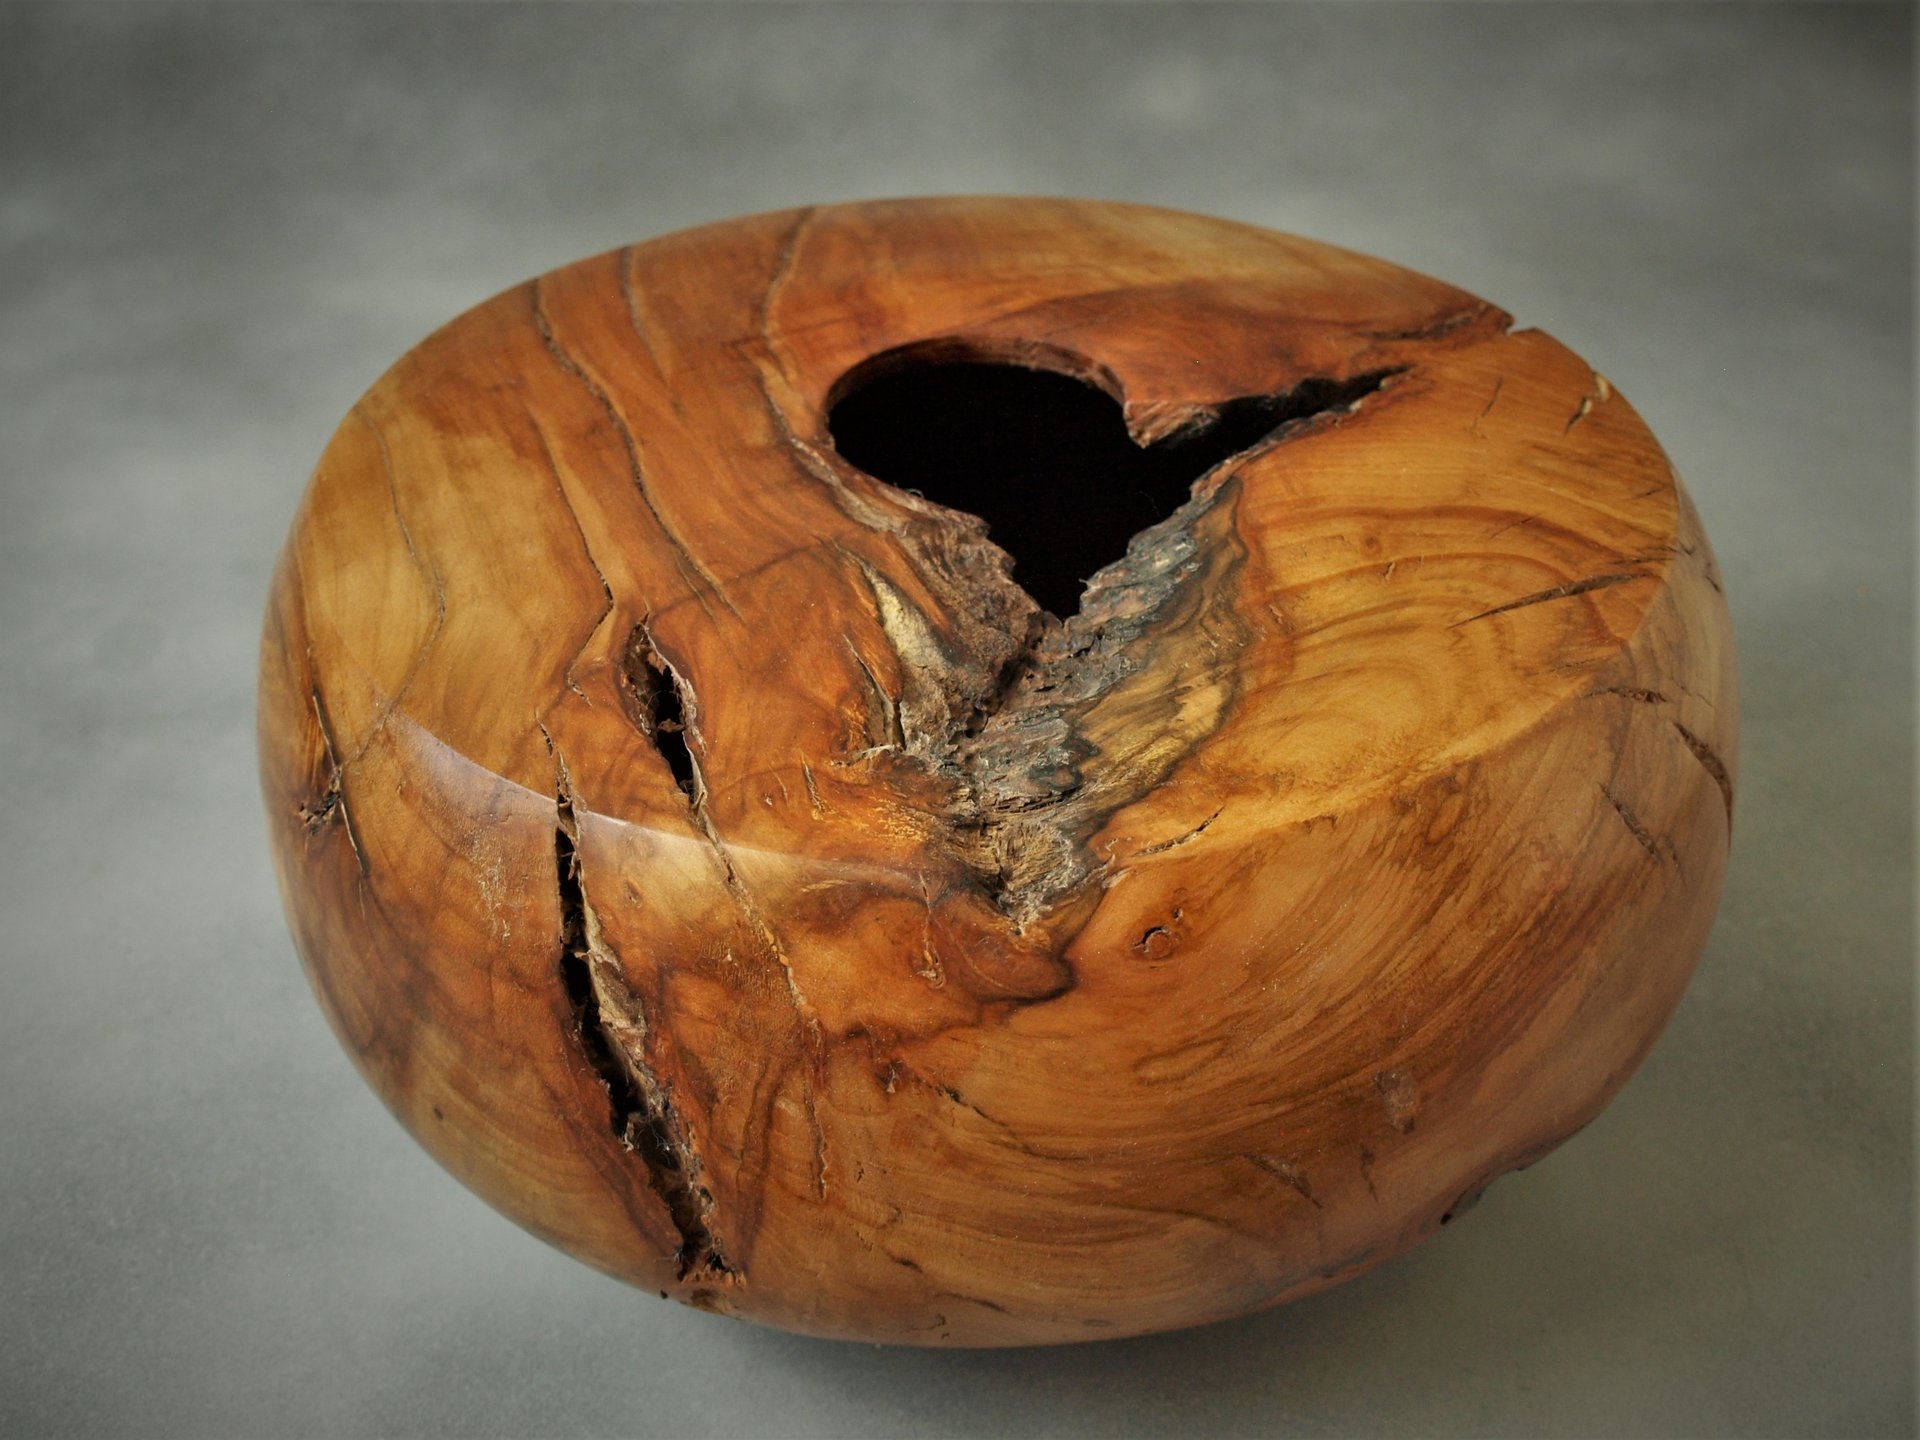 Apple root hollow form